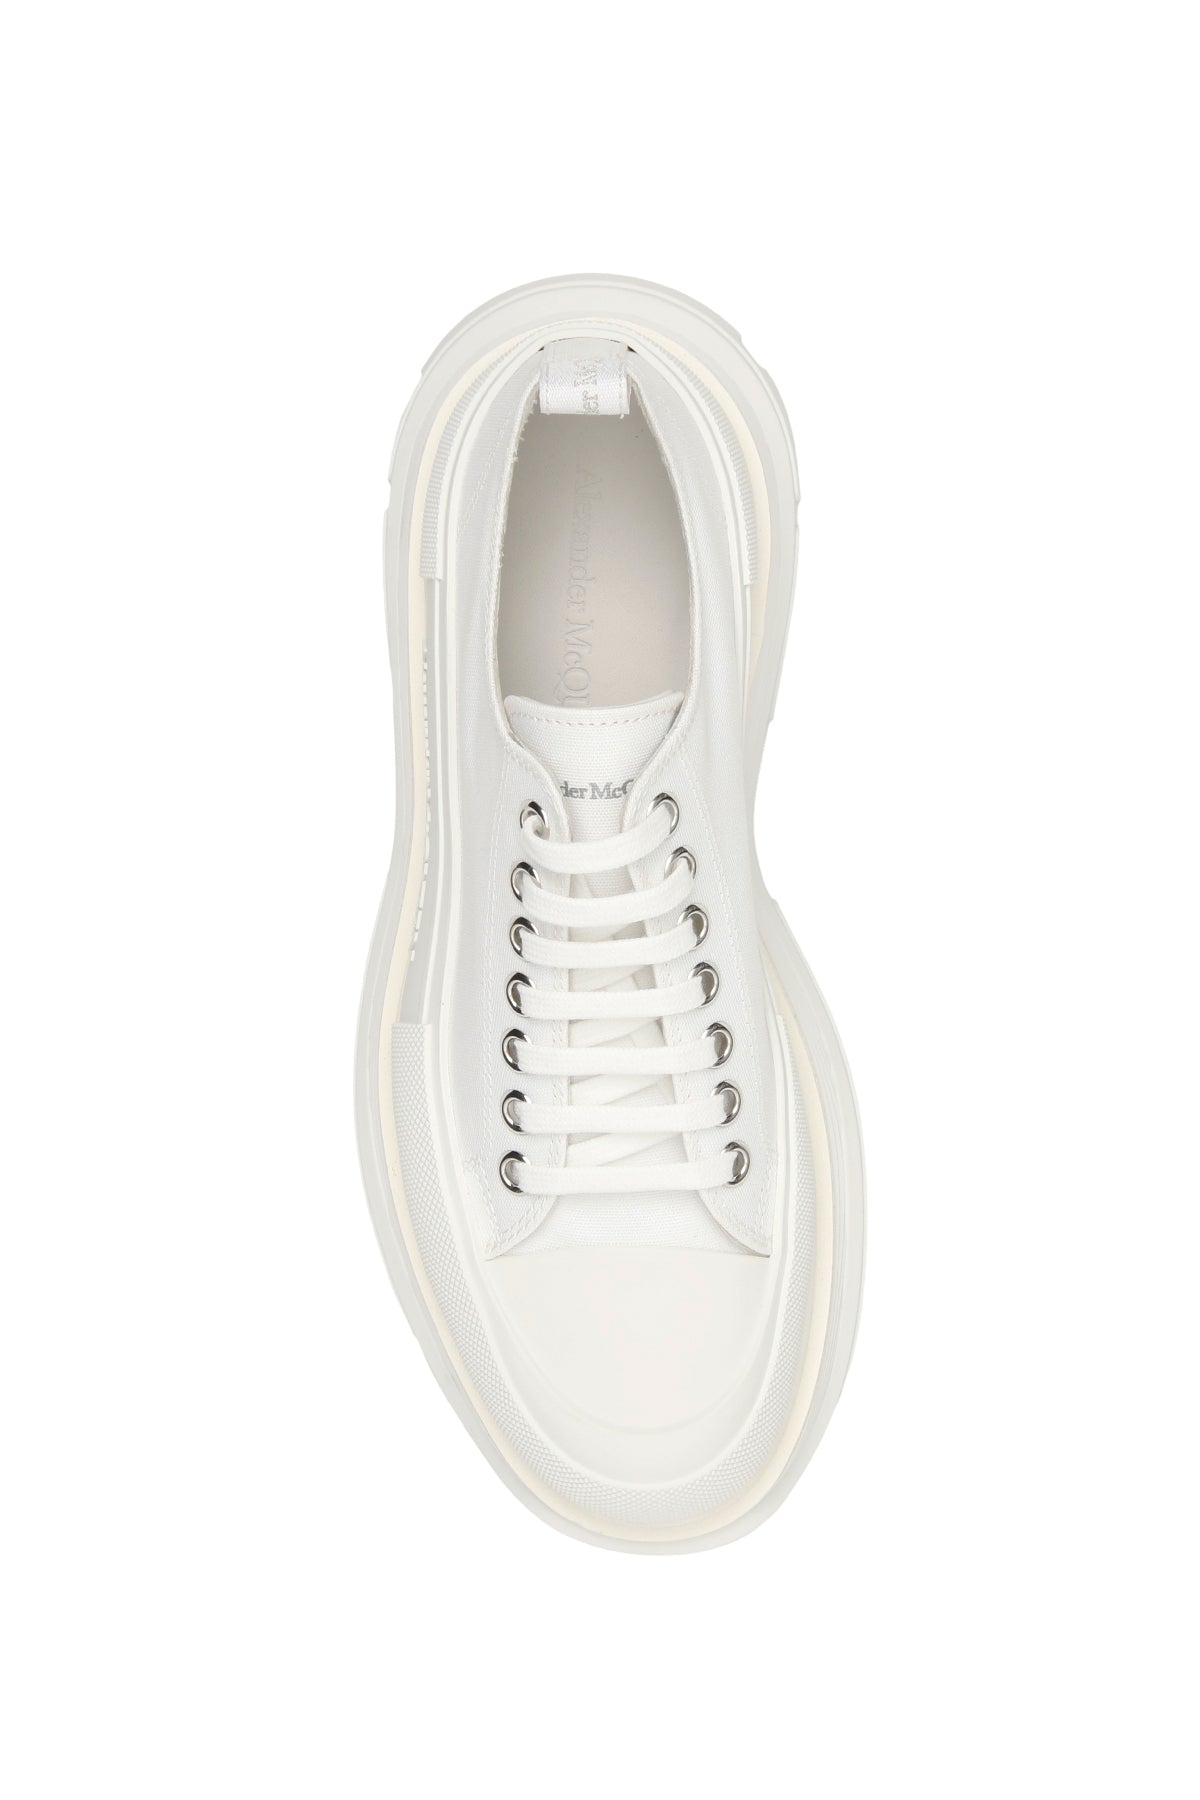 ALEXANDER MCQUEEN White Cotton Canvas Sneakers with Tonal Rubber Toe for Women